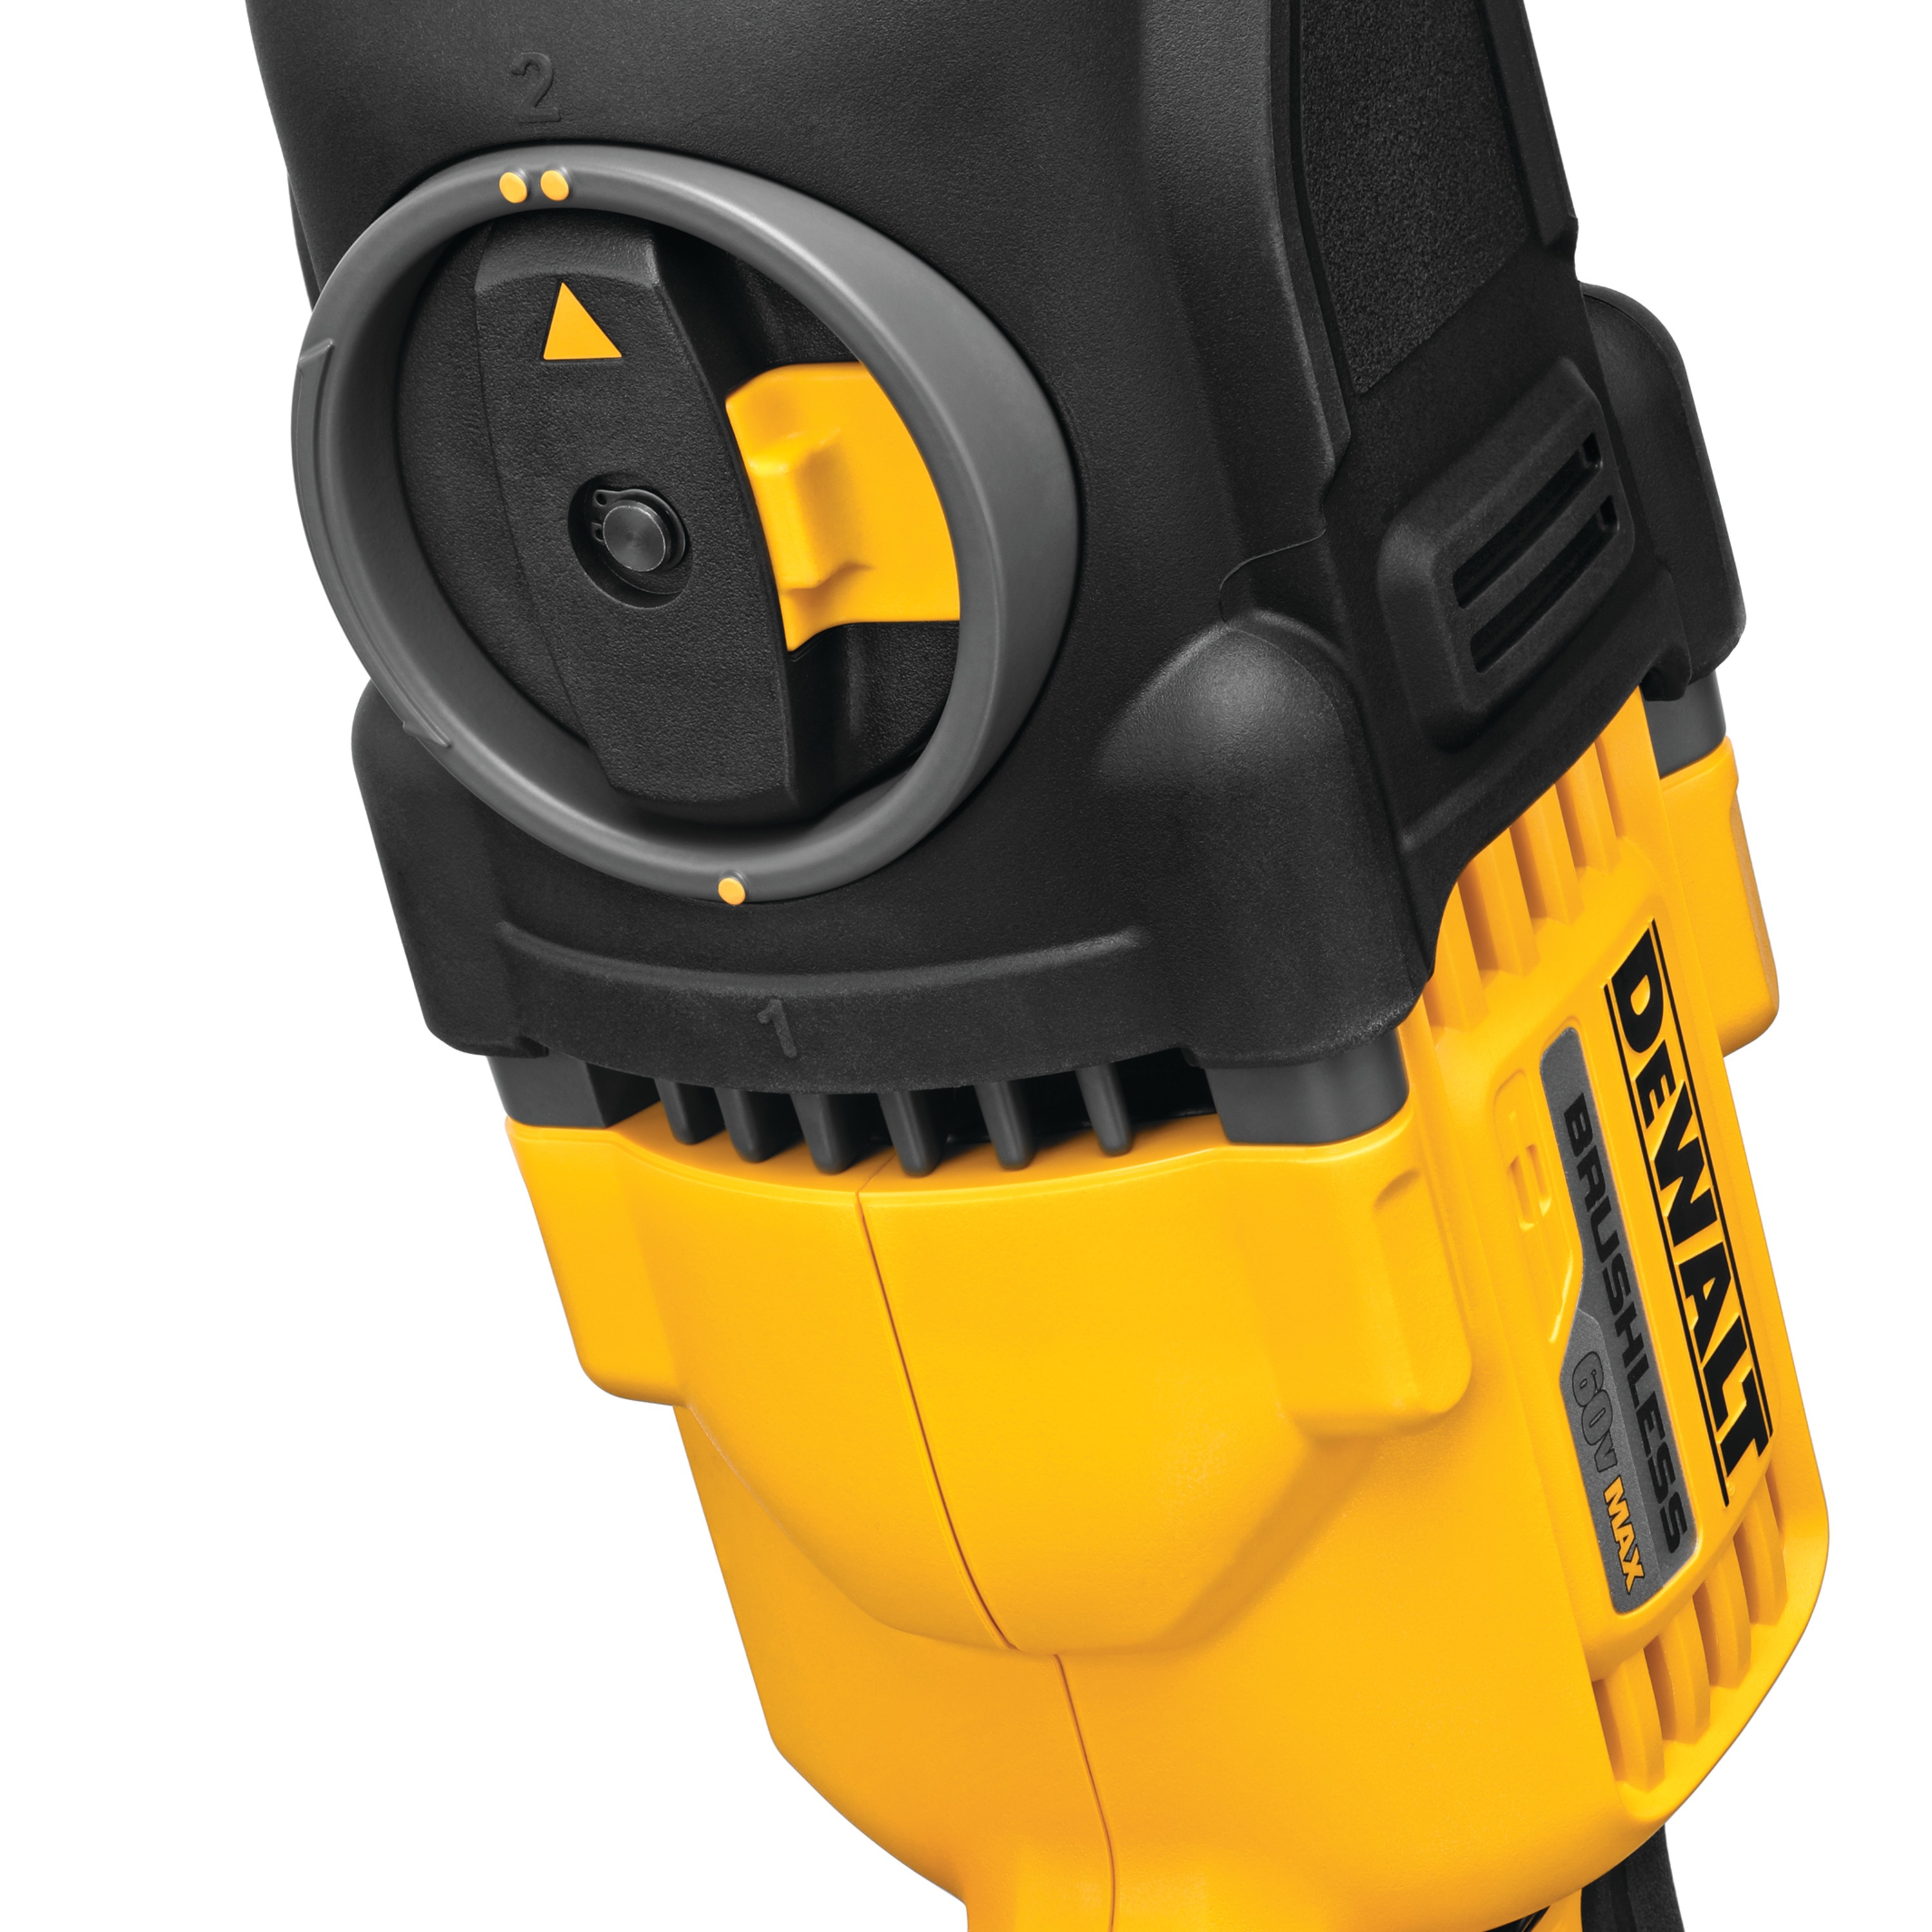 Quick-shift speed selector feature of an in-line stud and joist drill.